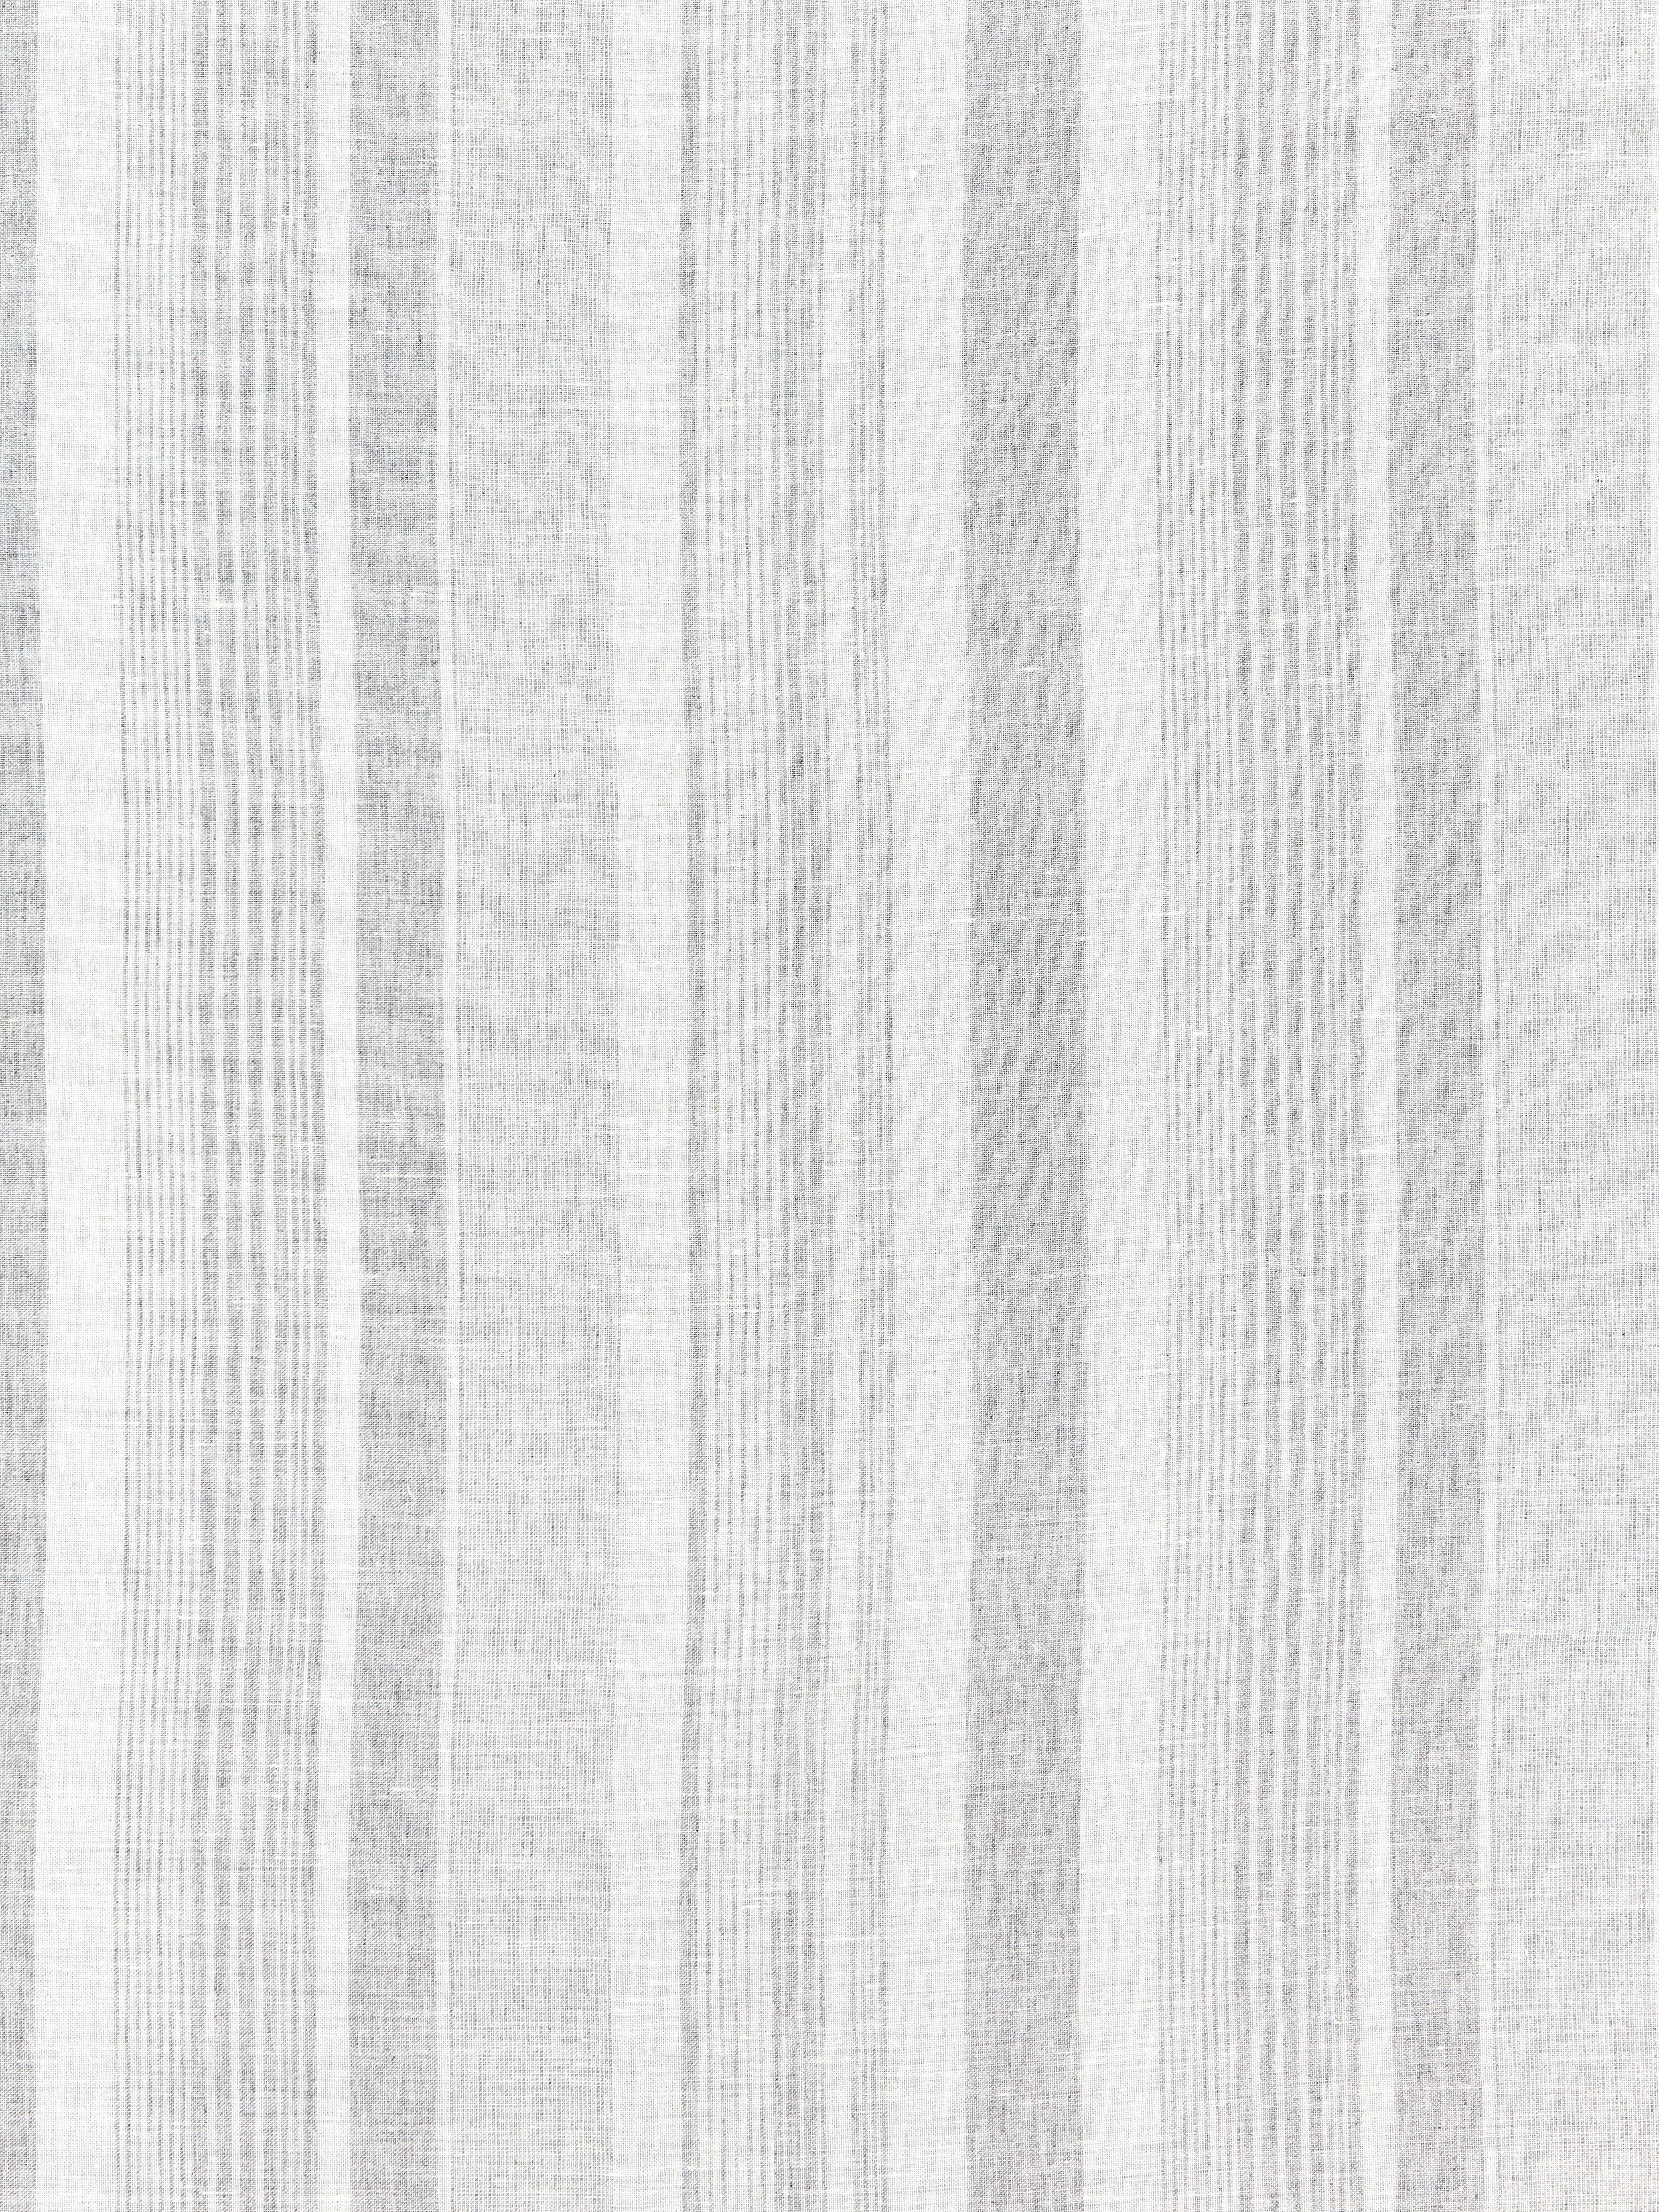 Montauk Stripe Sheer fabric in fog color - pattern number SC 000227046 - by Scalamandre in the Scalamandre Fabrics Book 1 collection